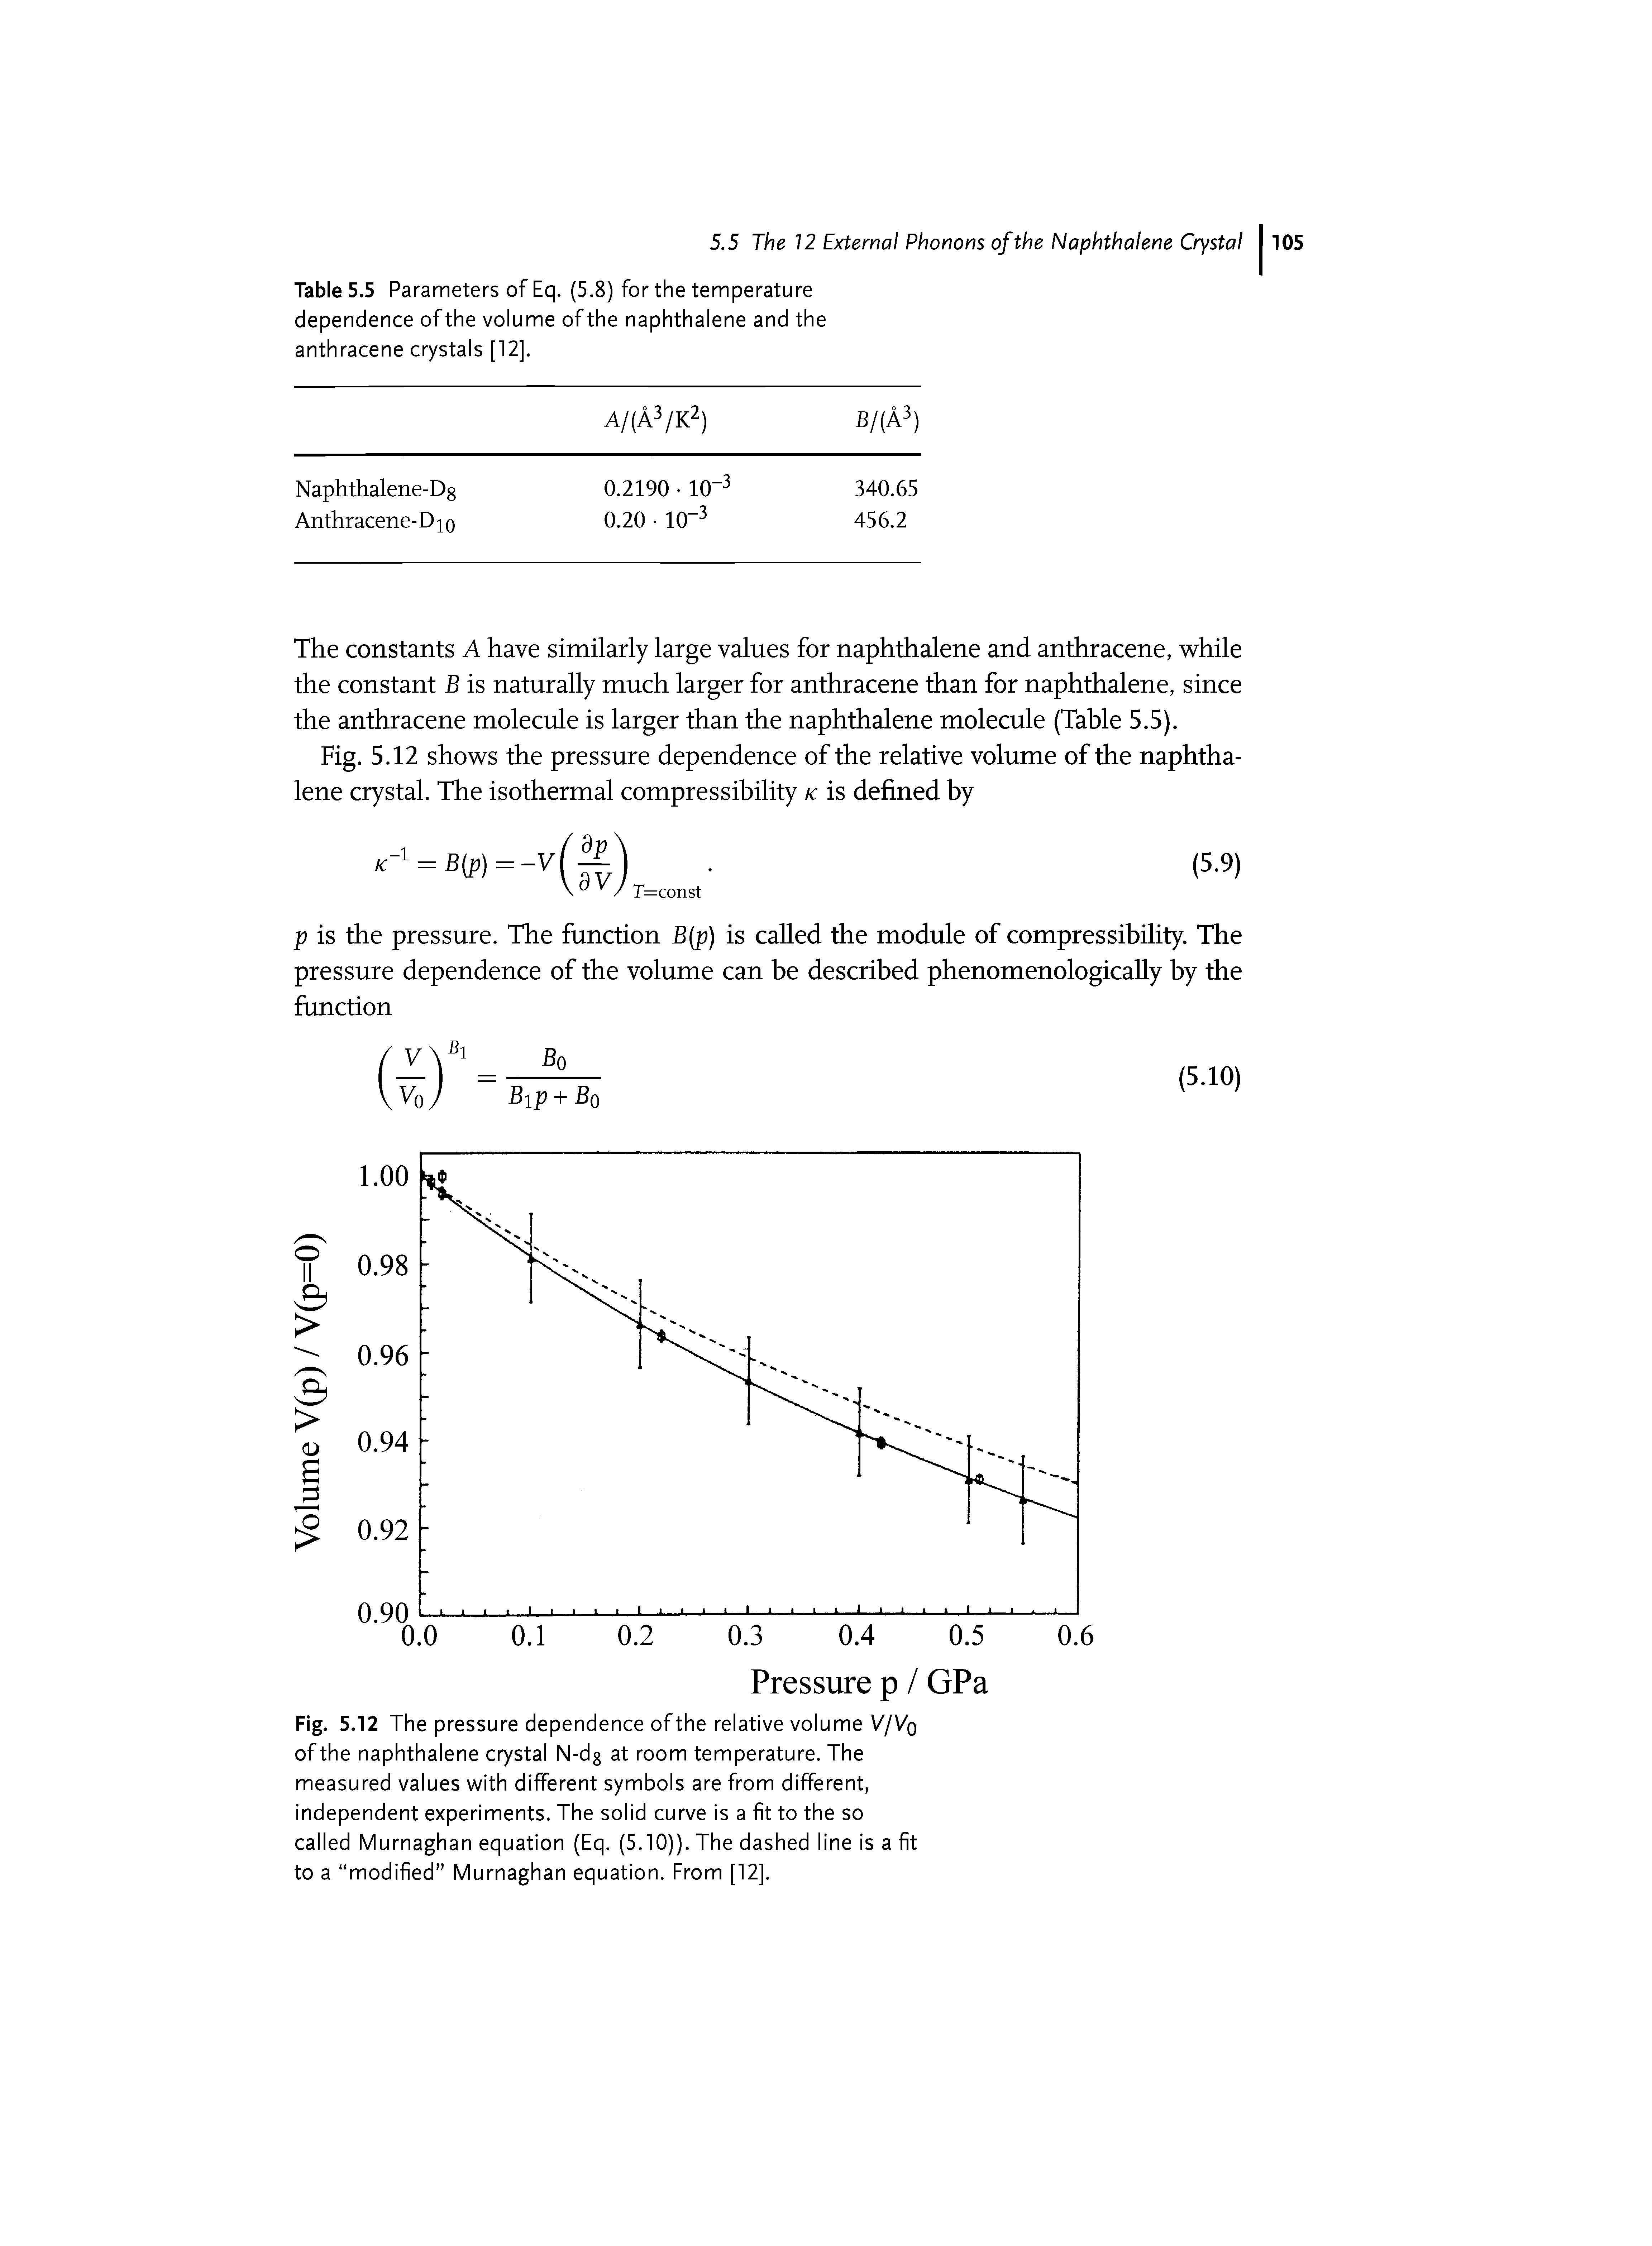 Fig. 5.12 The pressure dependence of the relative volume V/Vq of the naphthalene crystal N-dg at room temperature. The measured values with different symbols are from different, independent experiments. The solid curve is a fit to the so called Murnaghan equation (Eq. (5.10)). The dashed line is a fit to a modified Murnaghan equation. From [12].